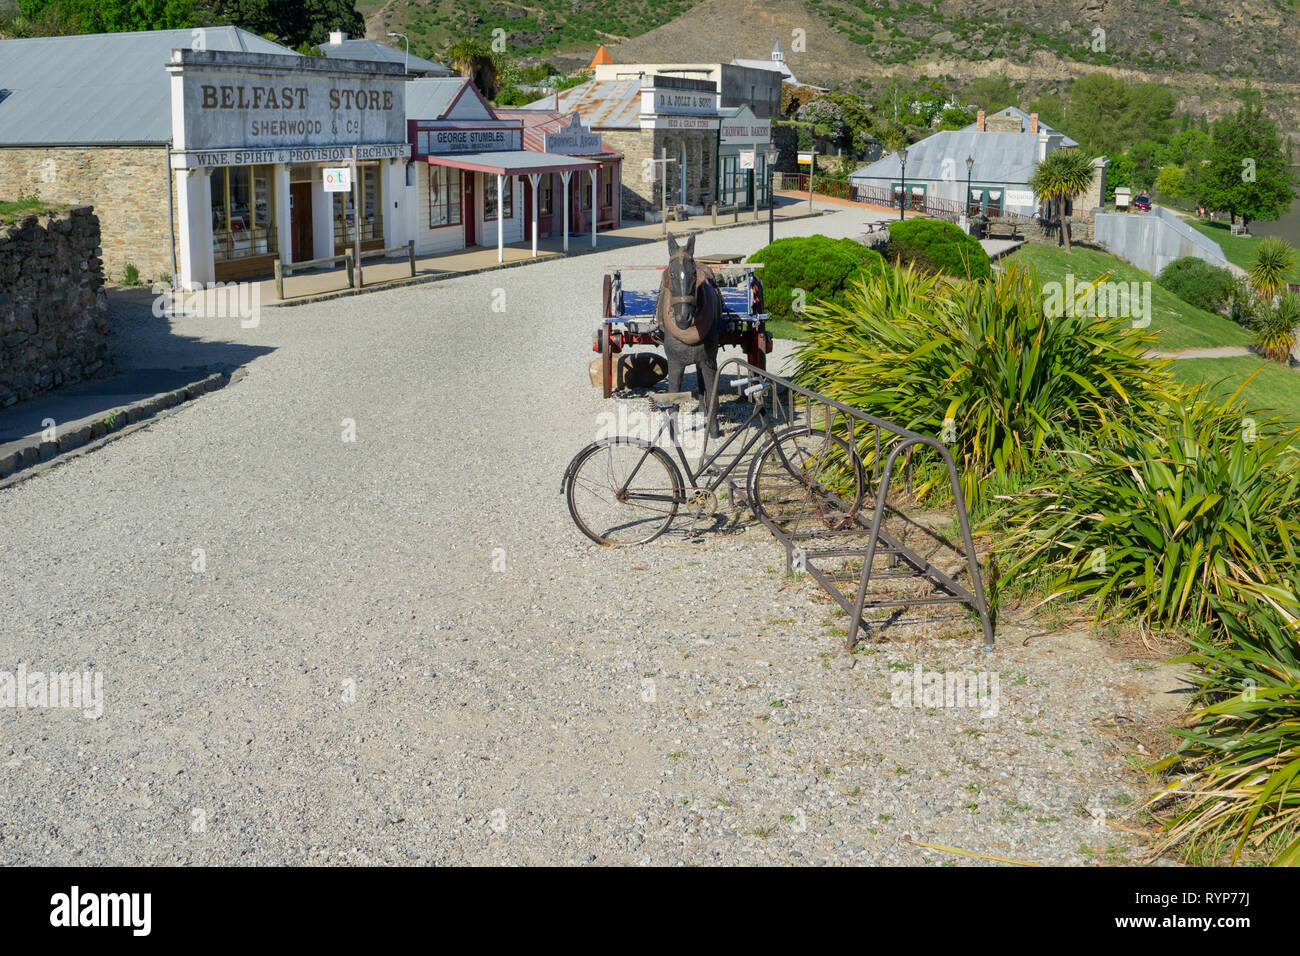 CROMWELL NEW ZEALAND - OCTOBER 21 2019; Cromwell New Zealand Heritage Precinct old gravel road in front of historic shop facades  old cycle rack and h Stock Photo